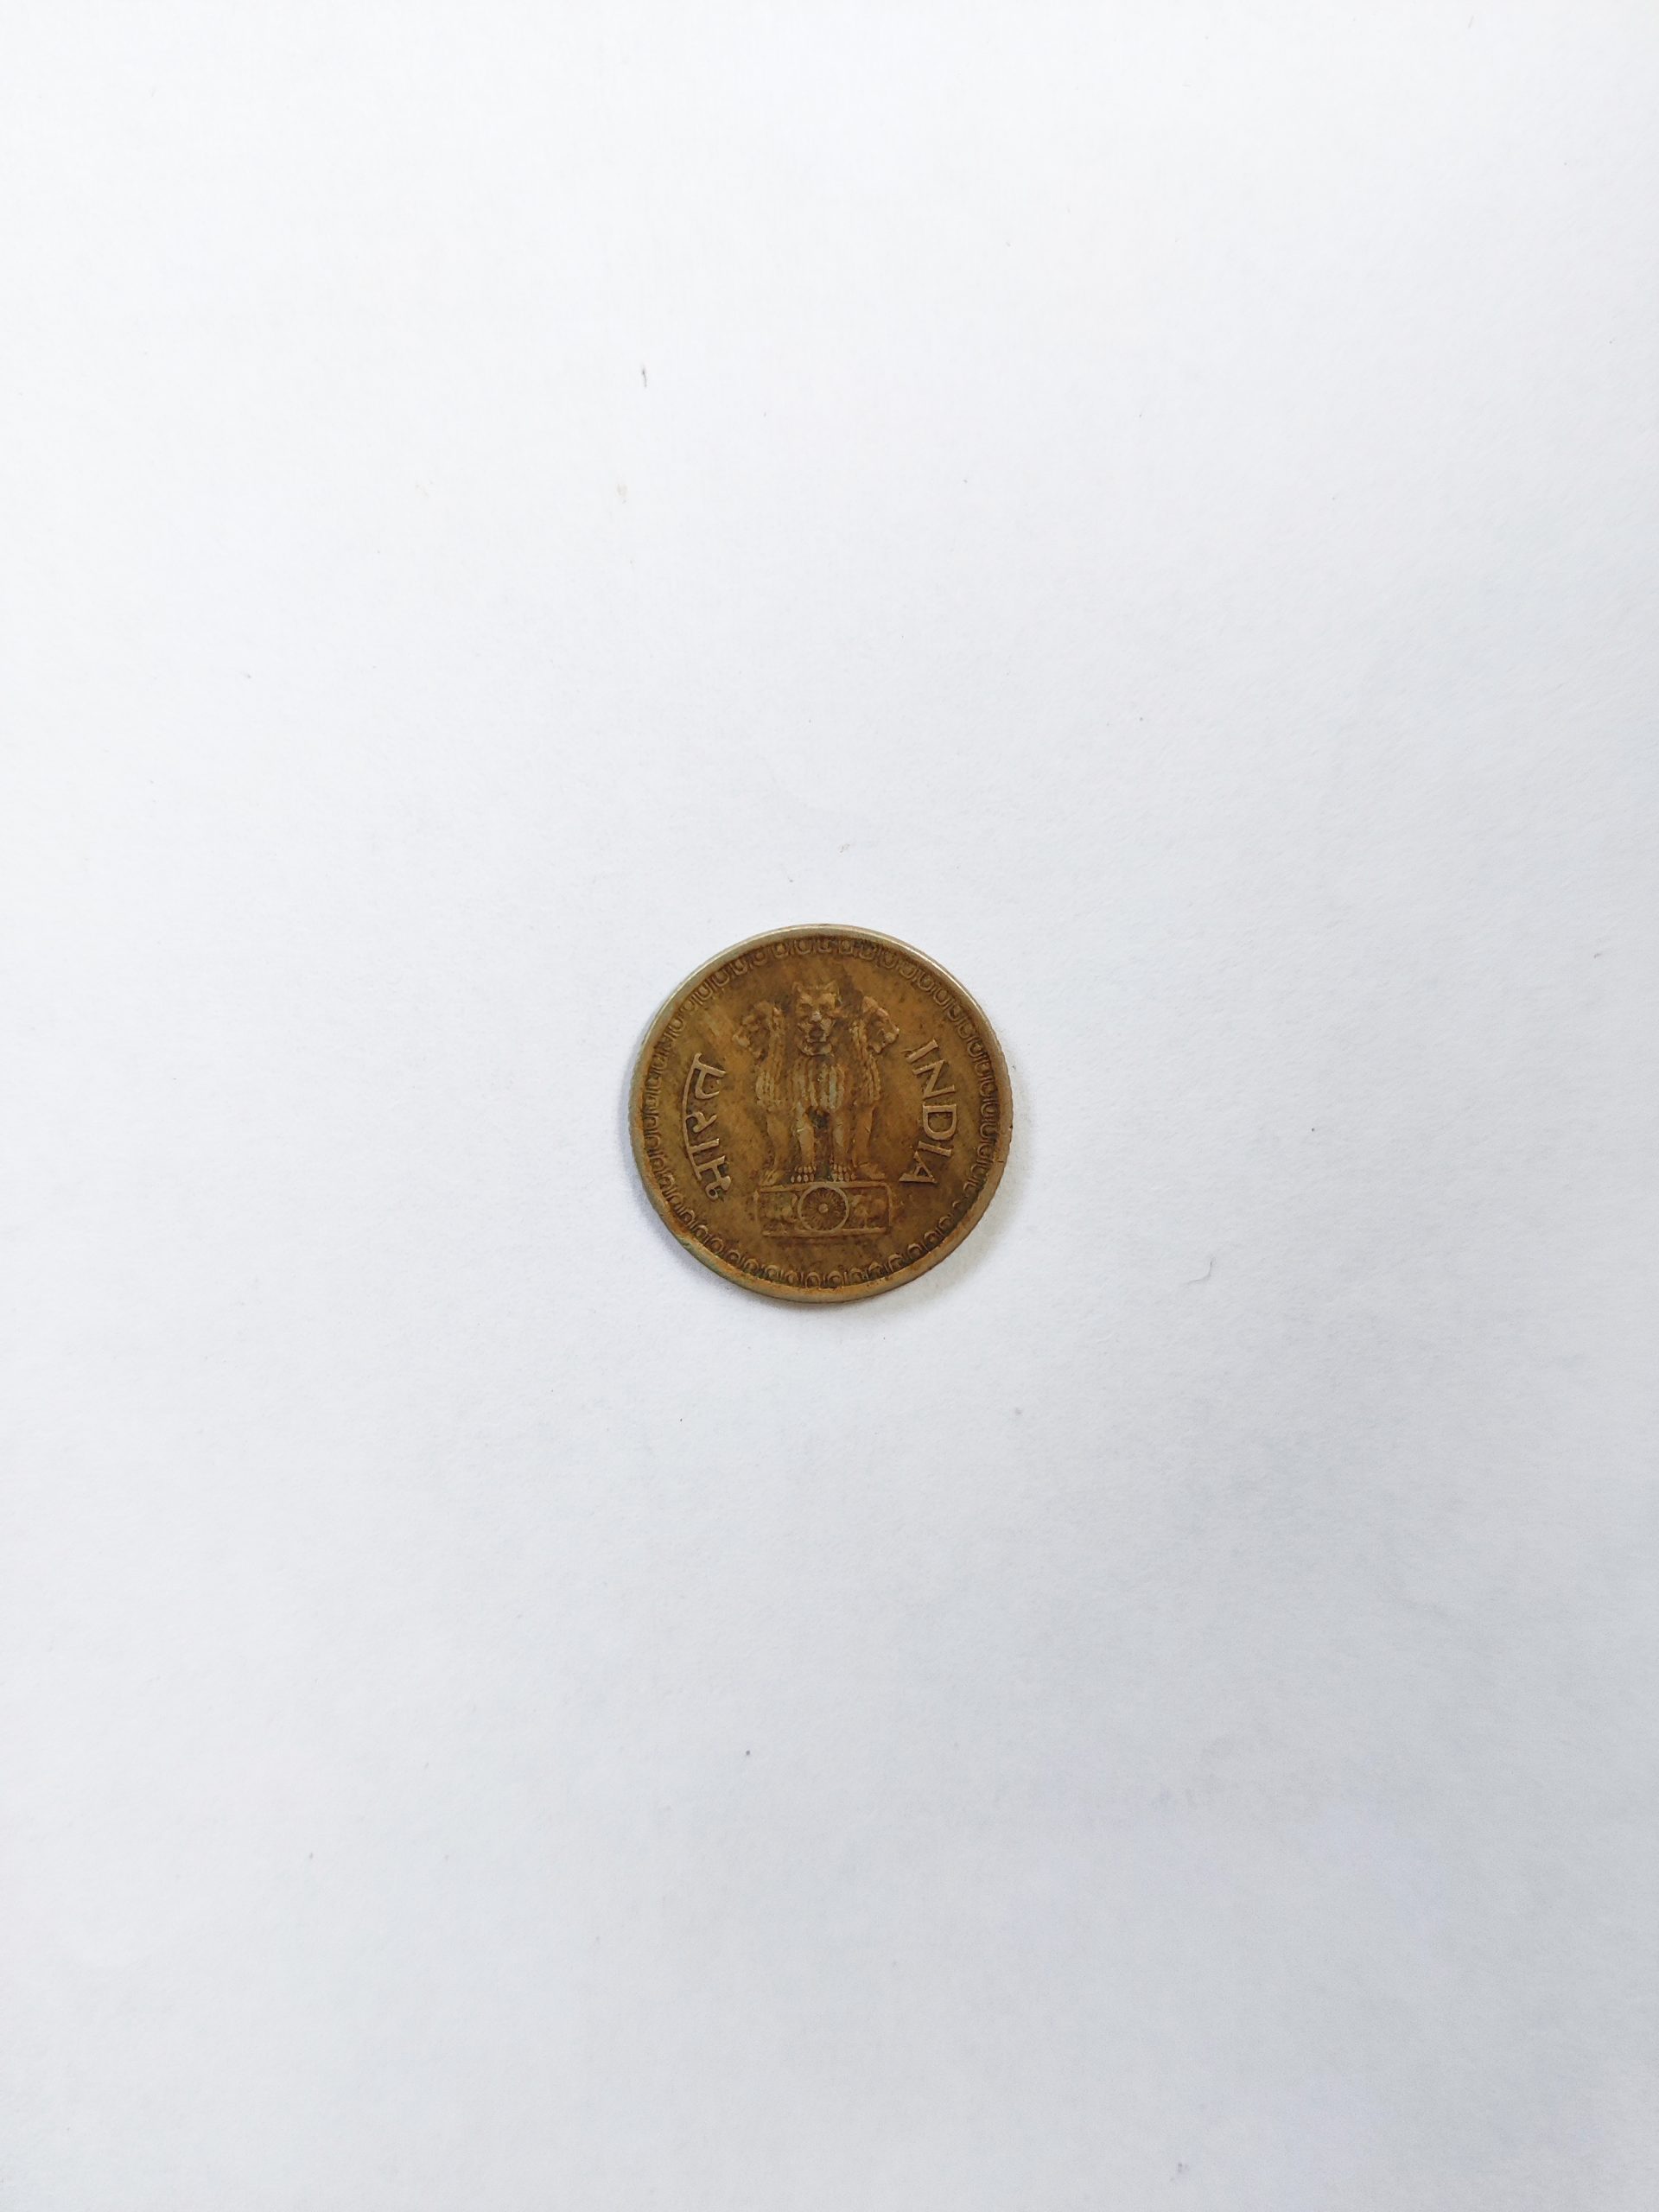 Old Indian coin